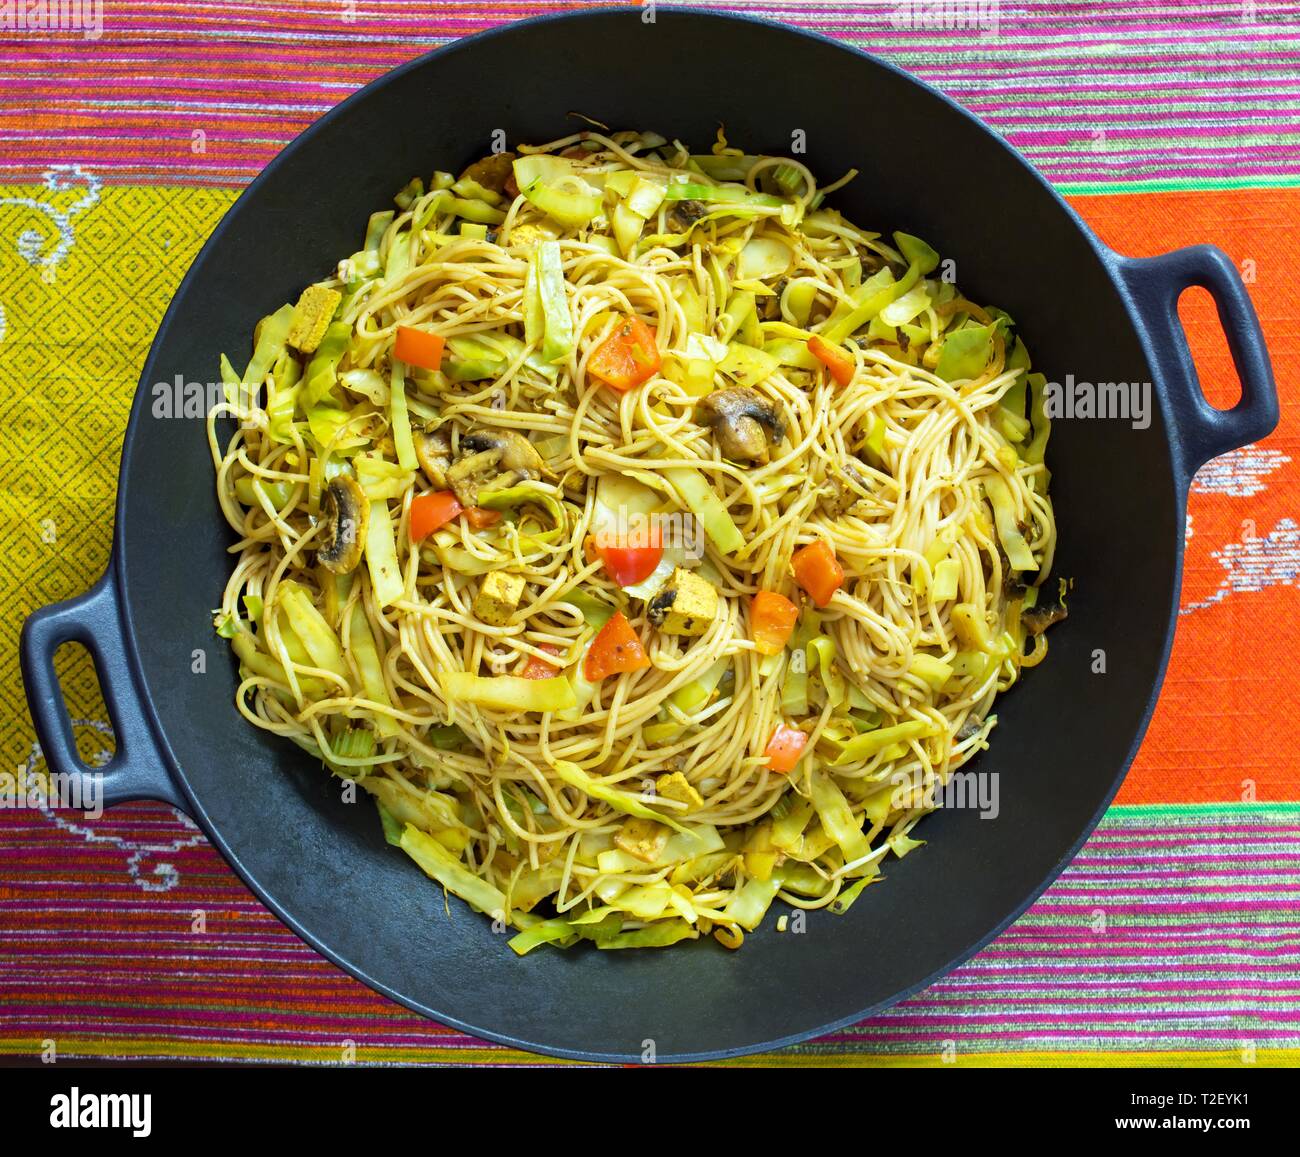 Indonesian noodle pan, Asian cuisine, Indonesia Stock Photo